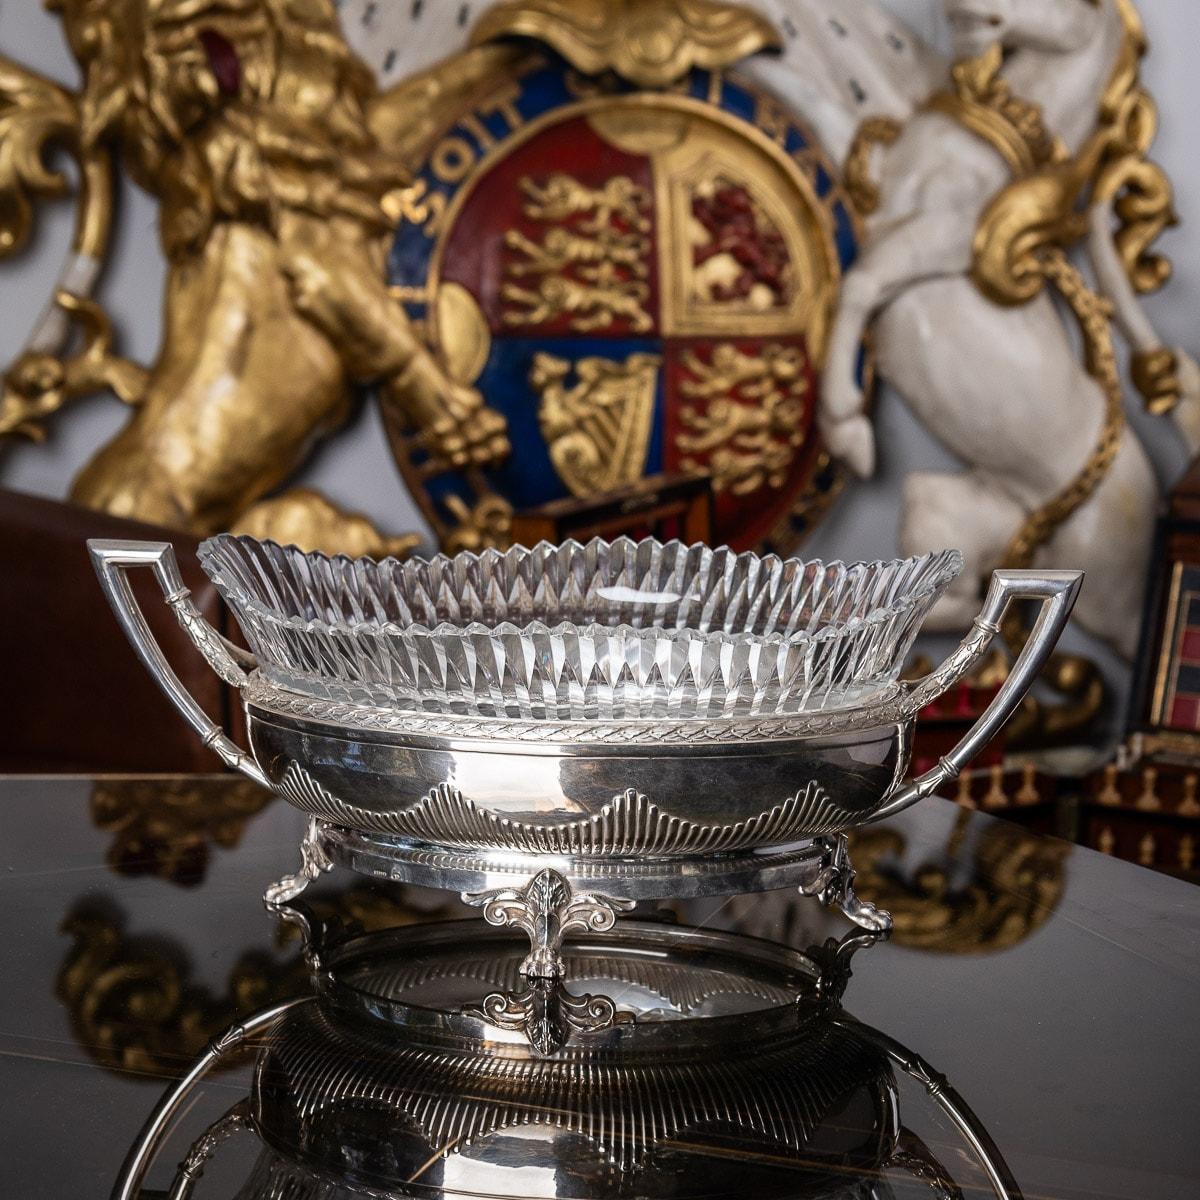 Antique early 20th century Russian Empire style solid silver and cut glass jardinière, oval shaped and mounted with geometrical twin handles, boarders embellished with laurel leaves and half fluted design along the base, standing on four leaf capped